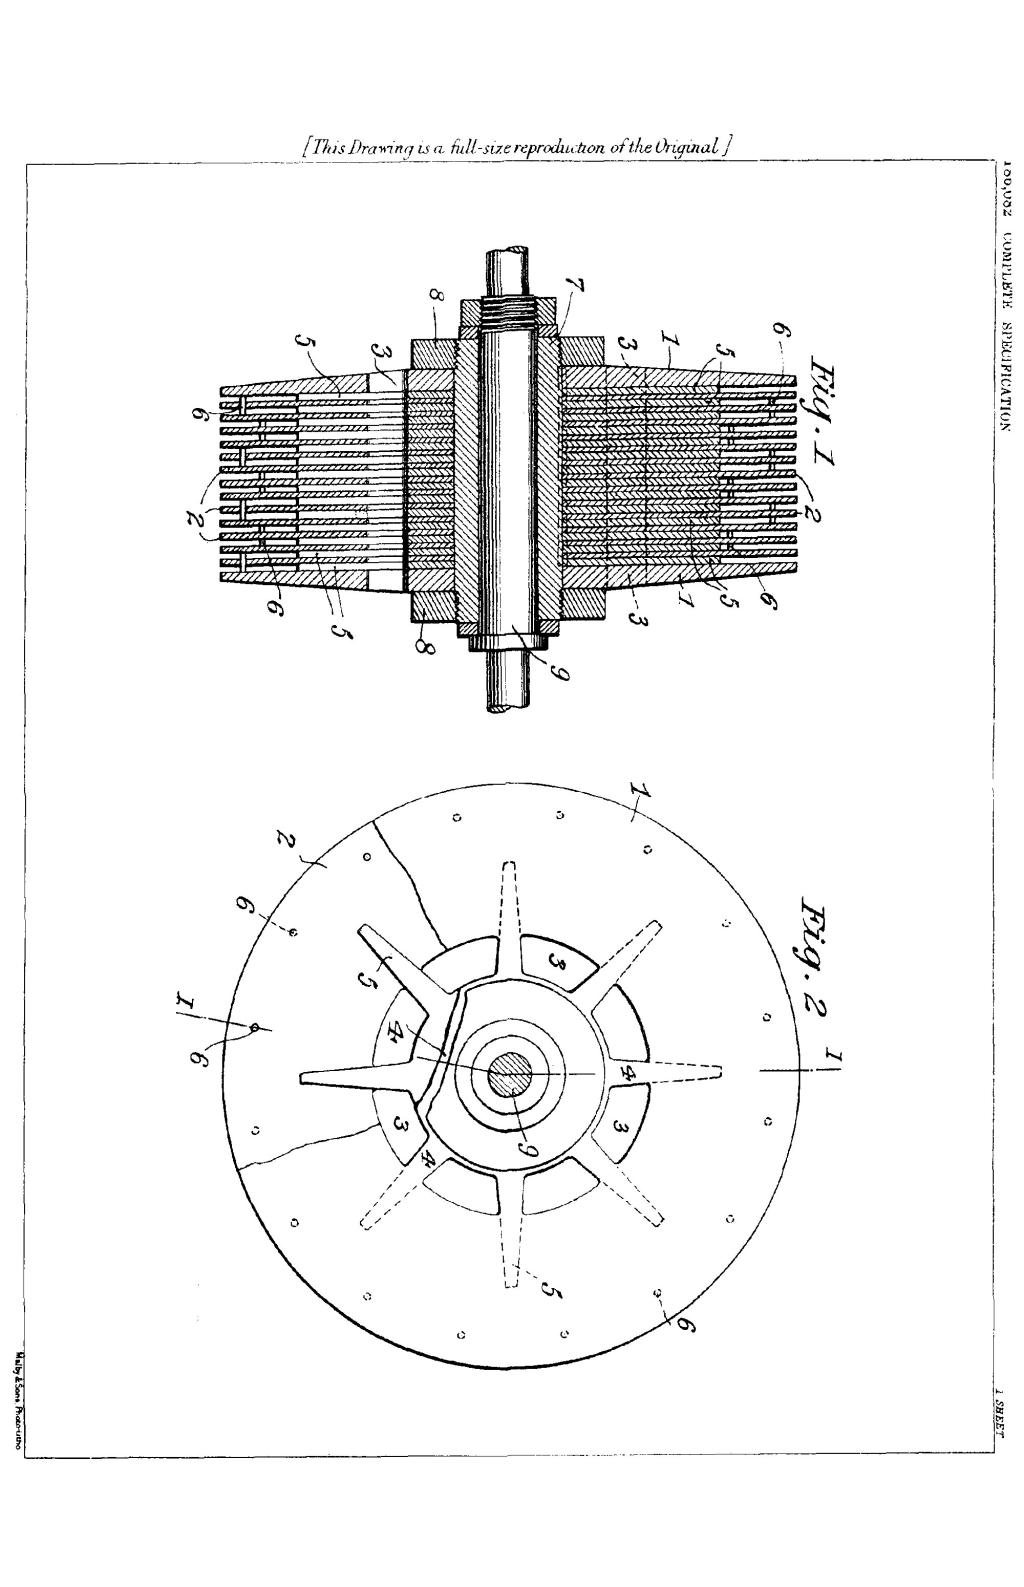 Nikola Tesla British Patent 186,082 - Improvements in the Construction of Steam and Gas Turbines - Image 1